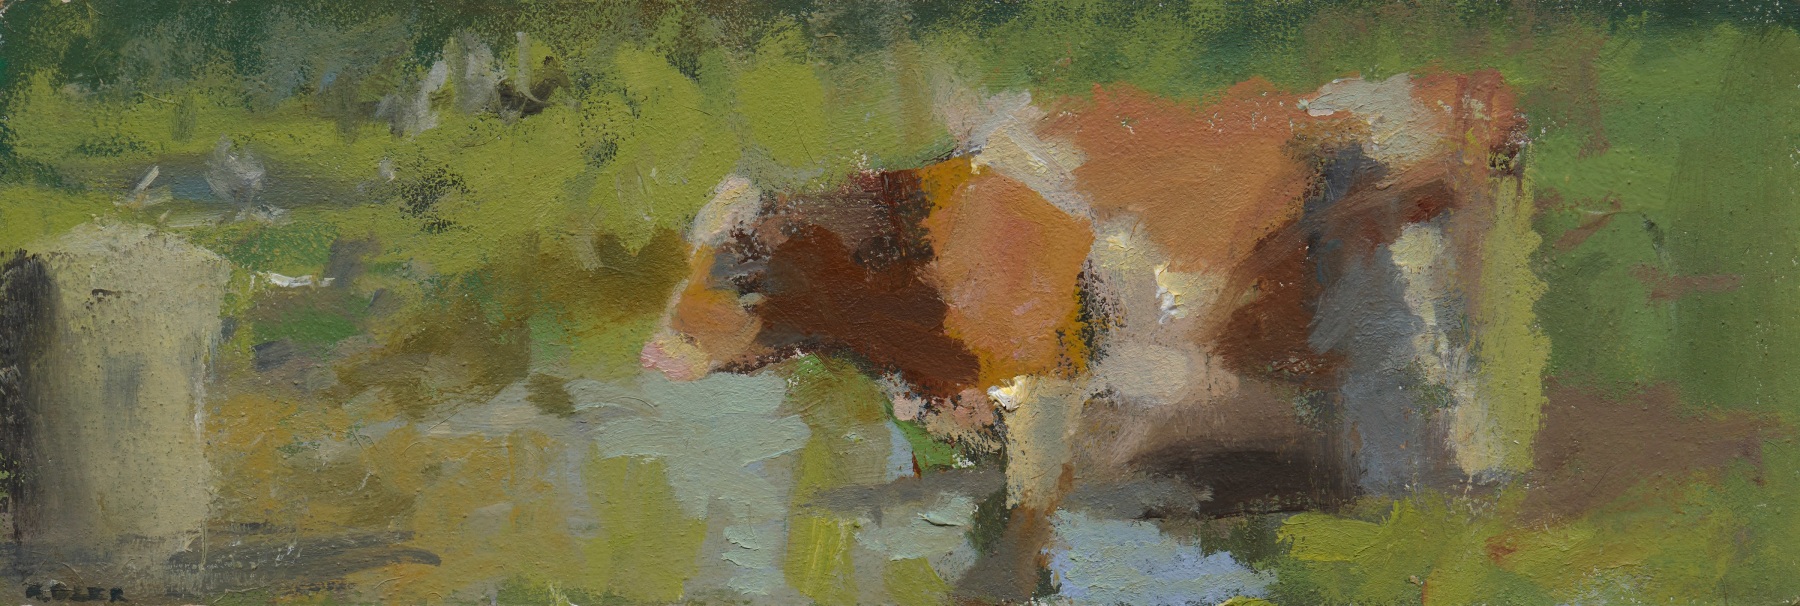 Laura Adler

&amp;quot;Cow Cooling Off in Heatwave,&amp;quot; 2019

oil on panel

3 x 9 in.